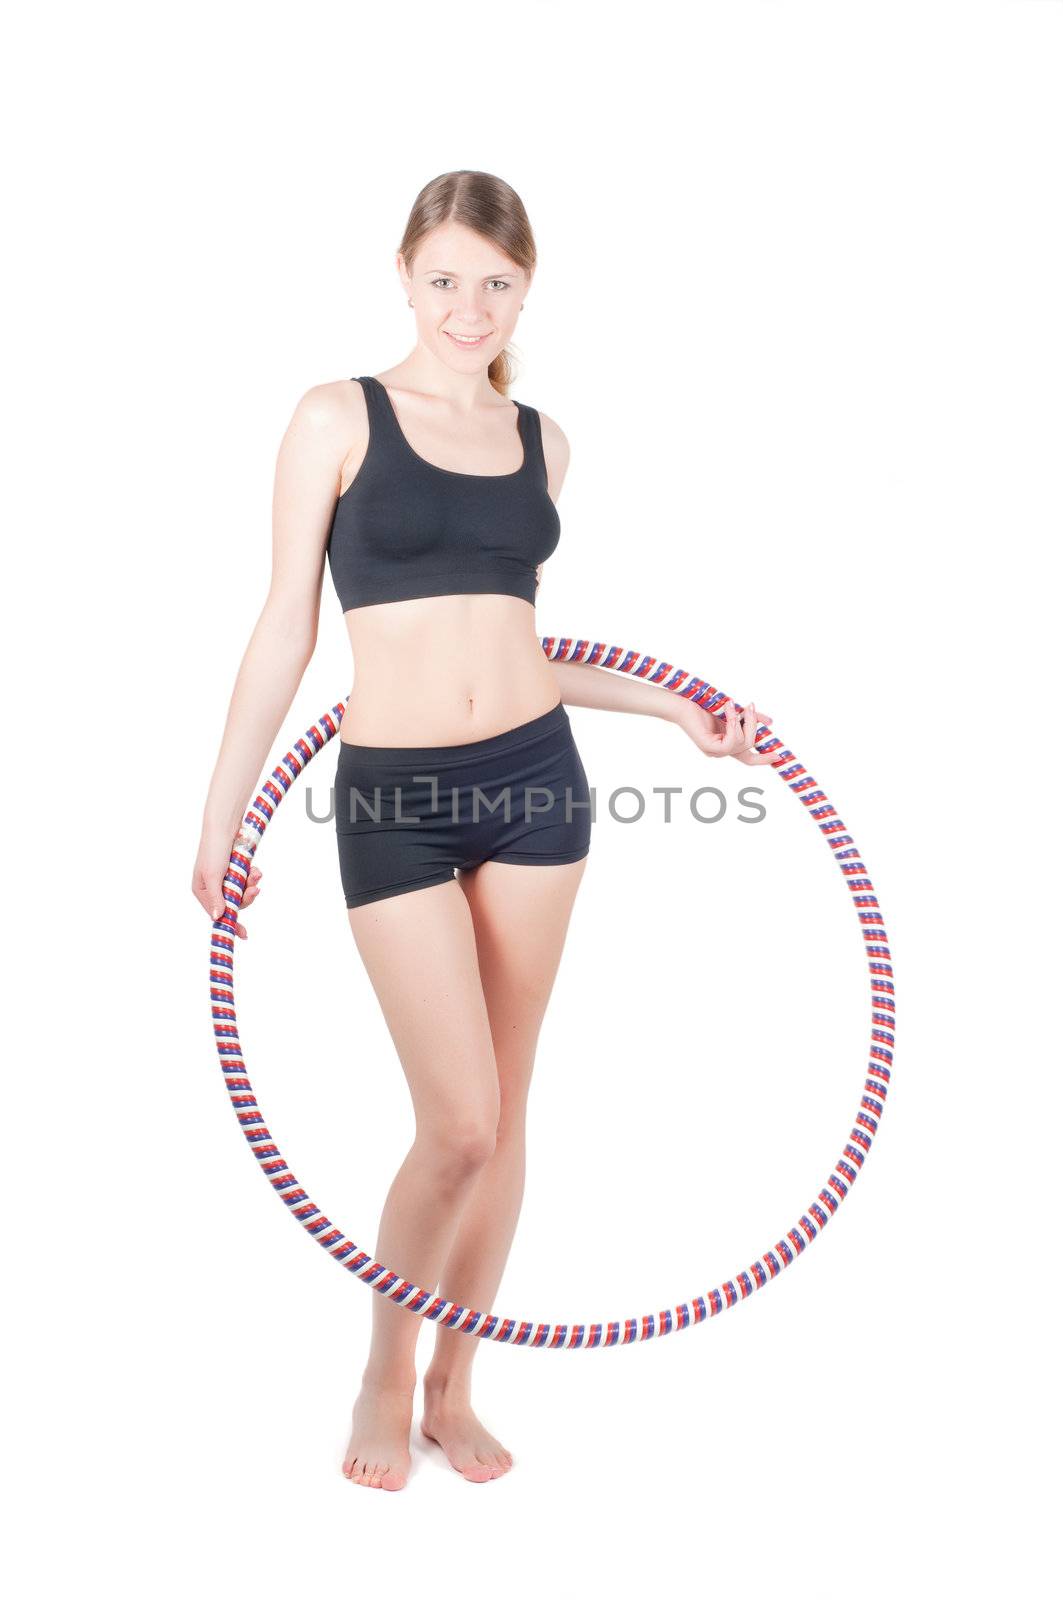 Fitness woman with hula hoop, isolated on white